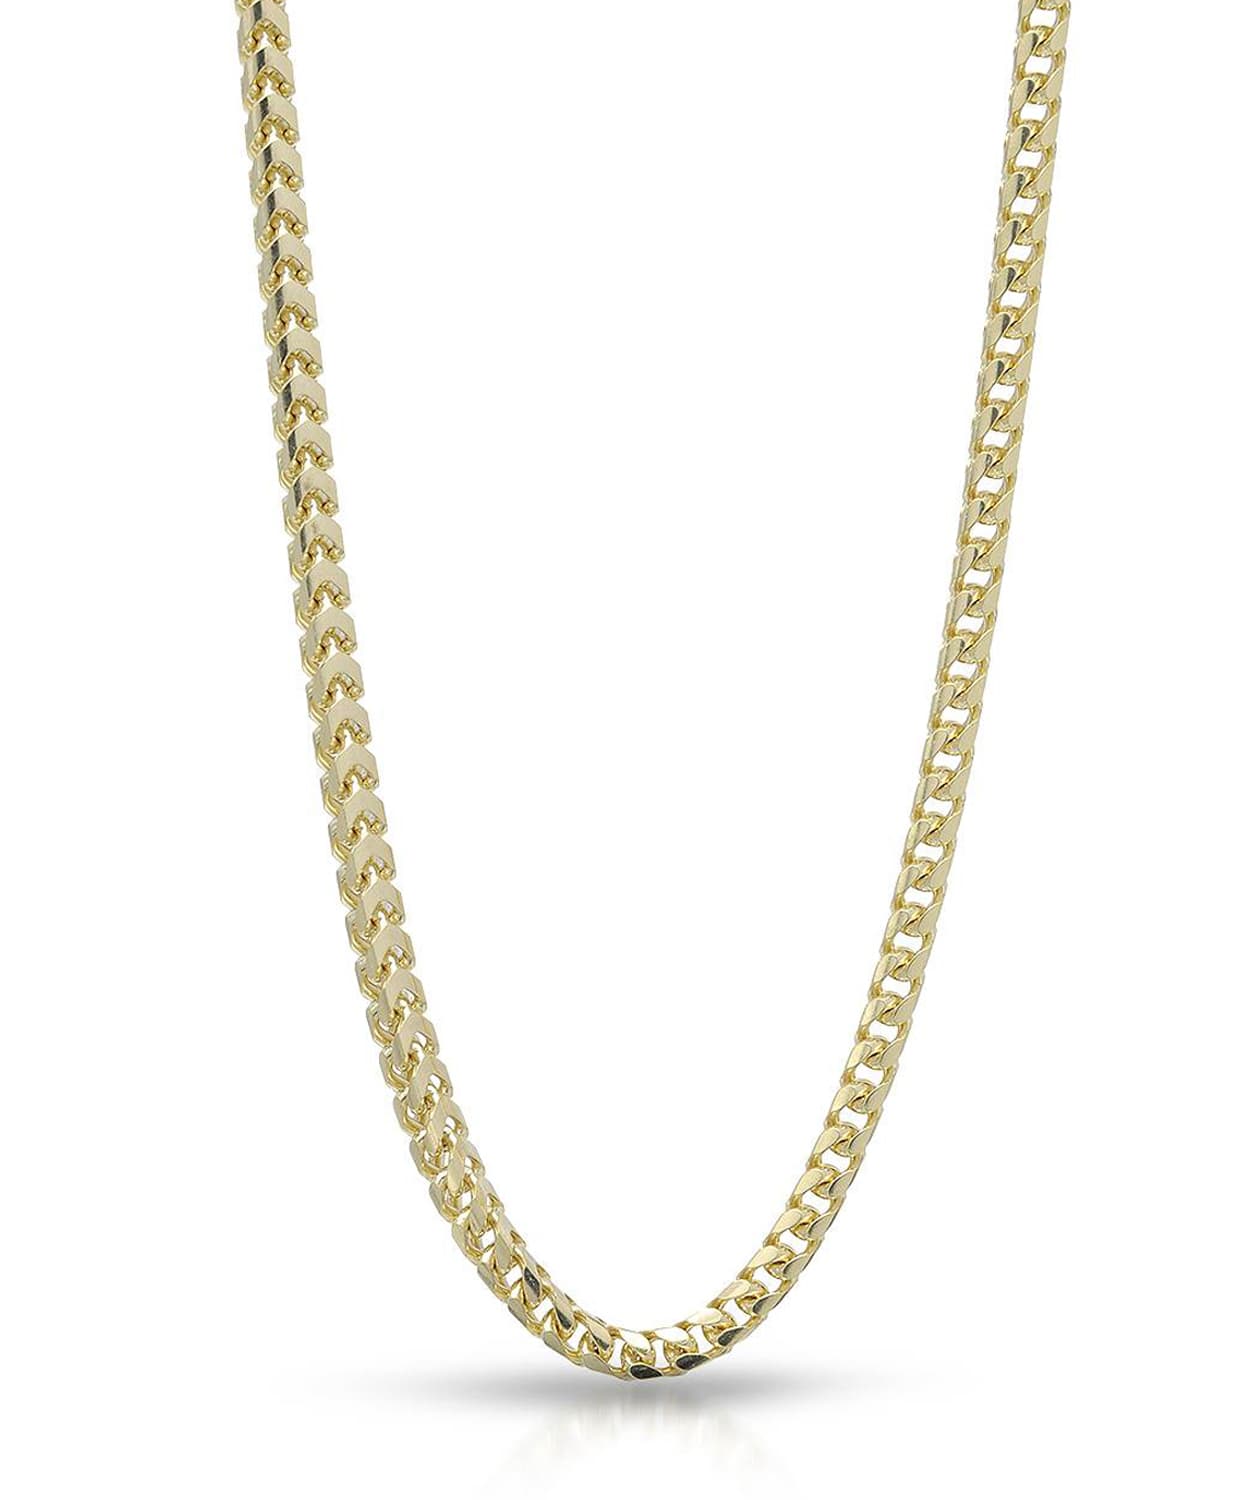 2.4mm 14k Yellow Gold Franco Chain View 1